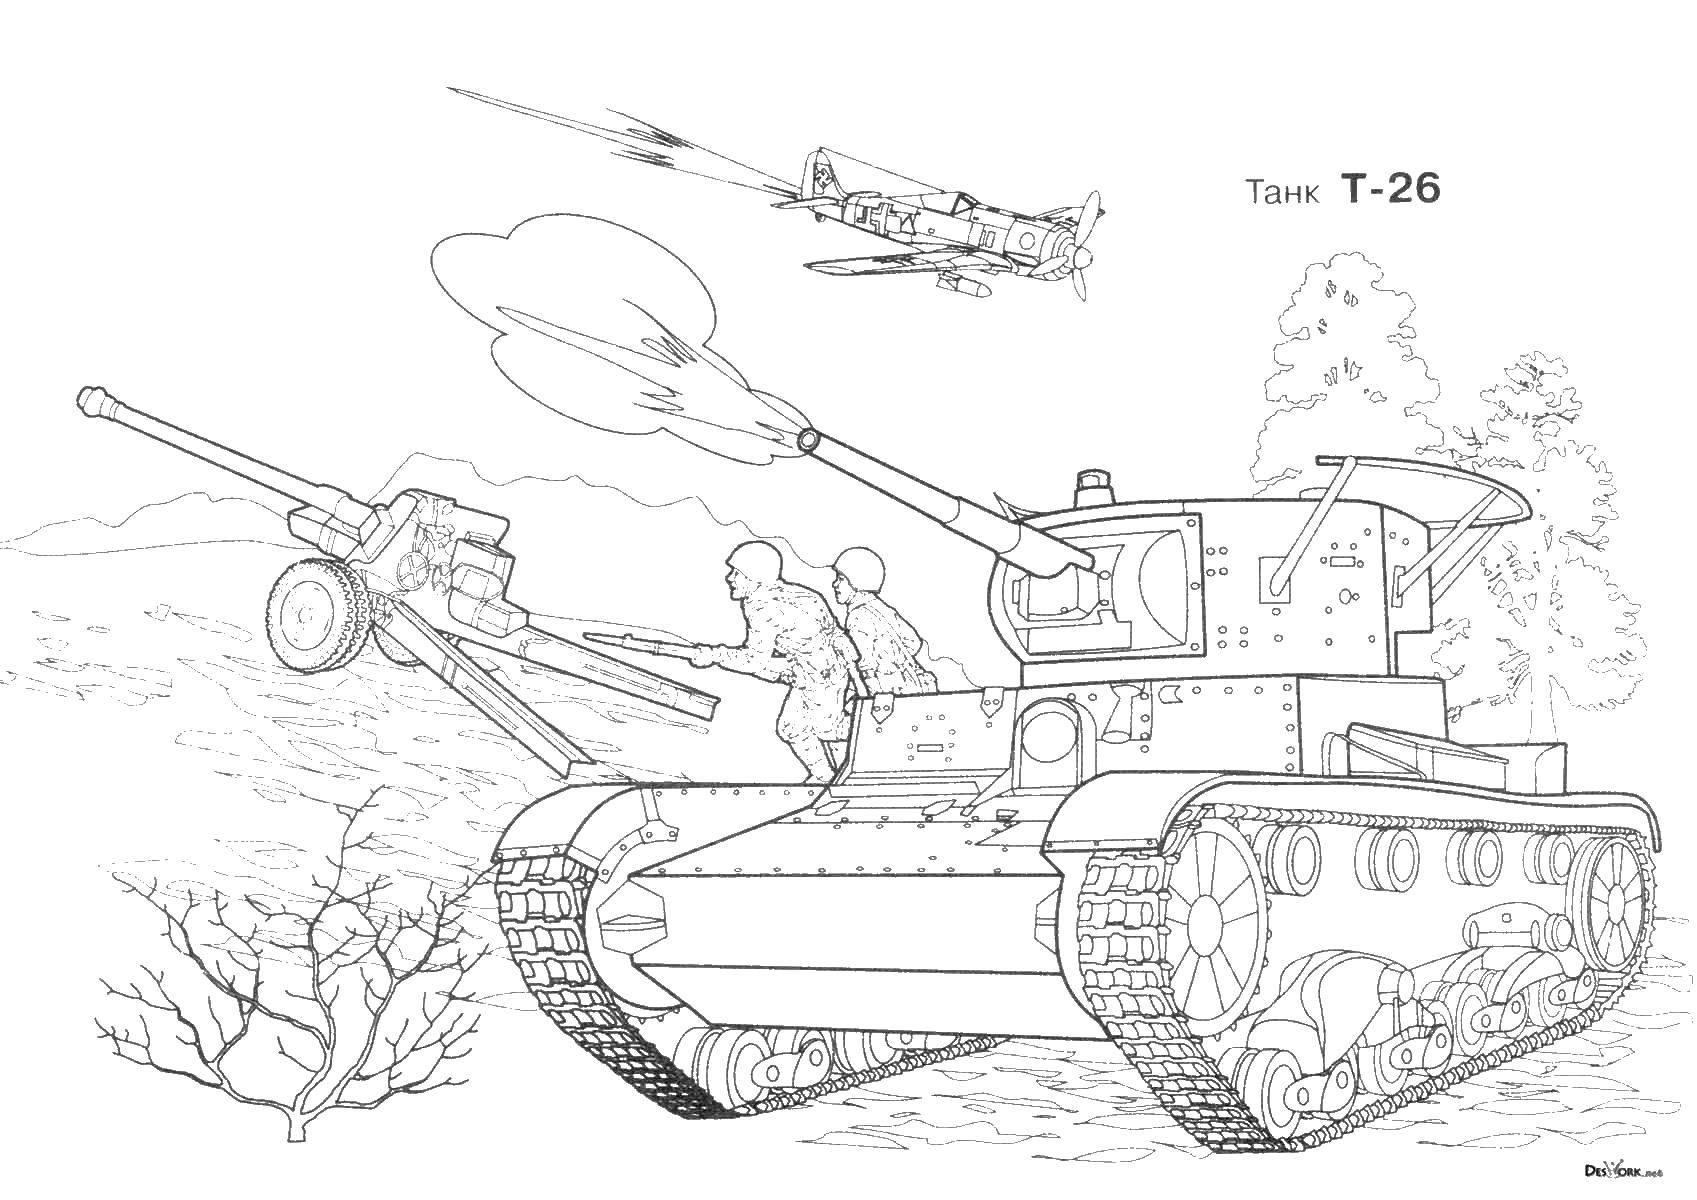 Coloring Tank t-26. Category military coloring pages. Tags:  Tank, transportation, machinery, military.